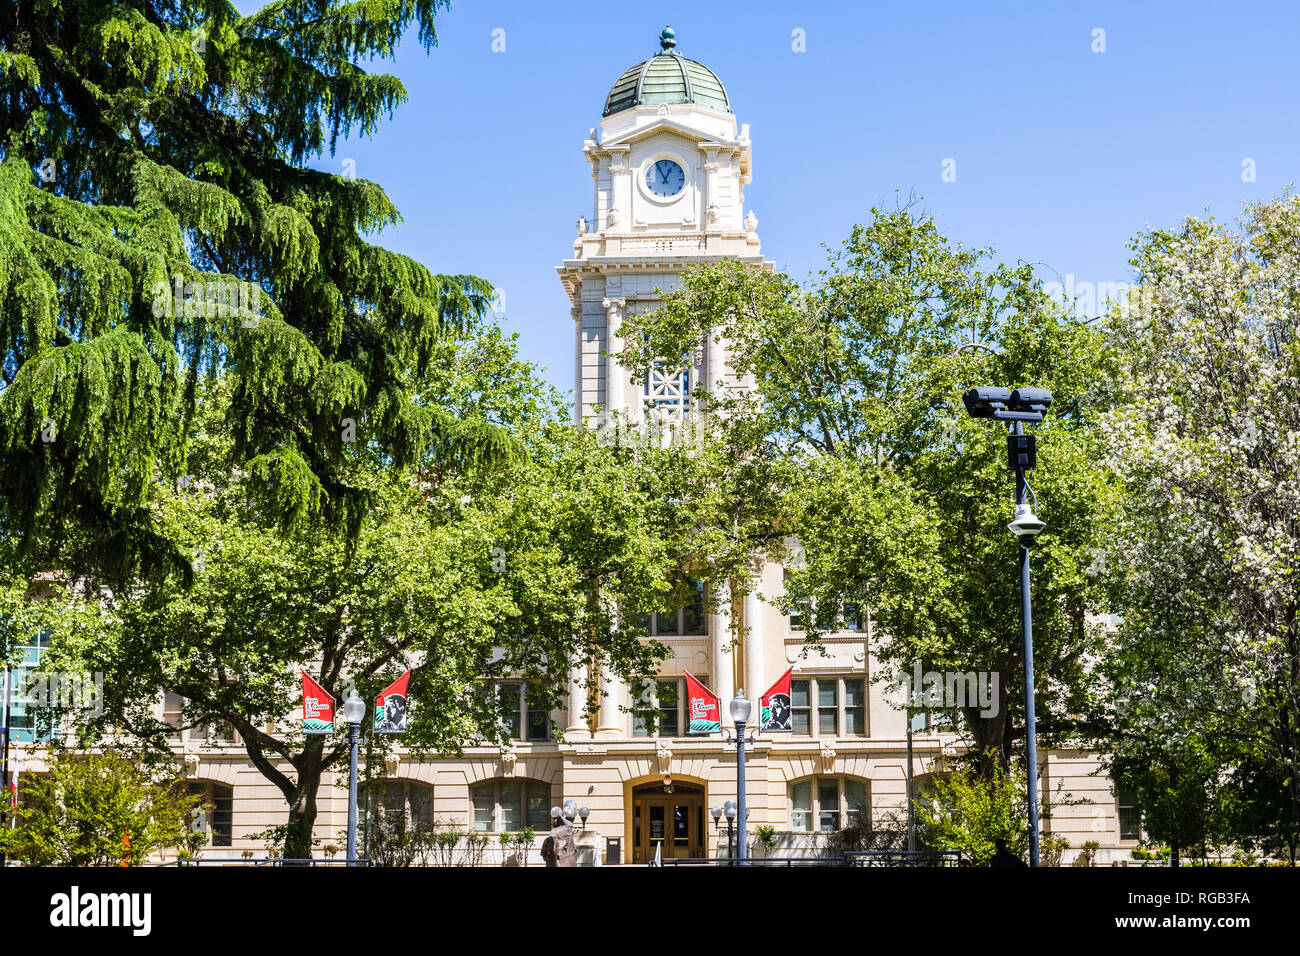 April 14, 2018 Sacramento / CA / USA - Exterior view of the City Hall rising behind the trees in Cezar E Chavez Plaza, built in 1909 and renovated in  Stock Photo